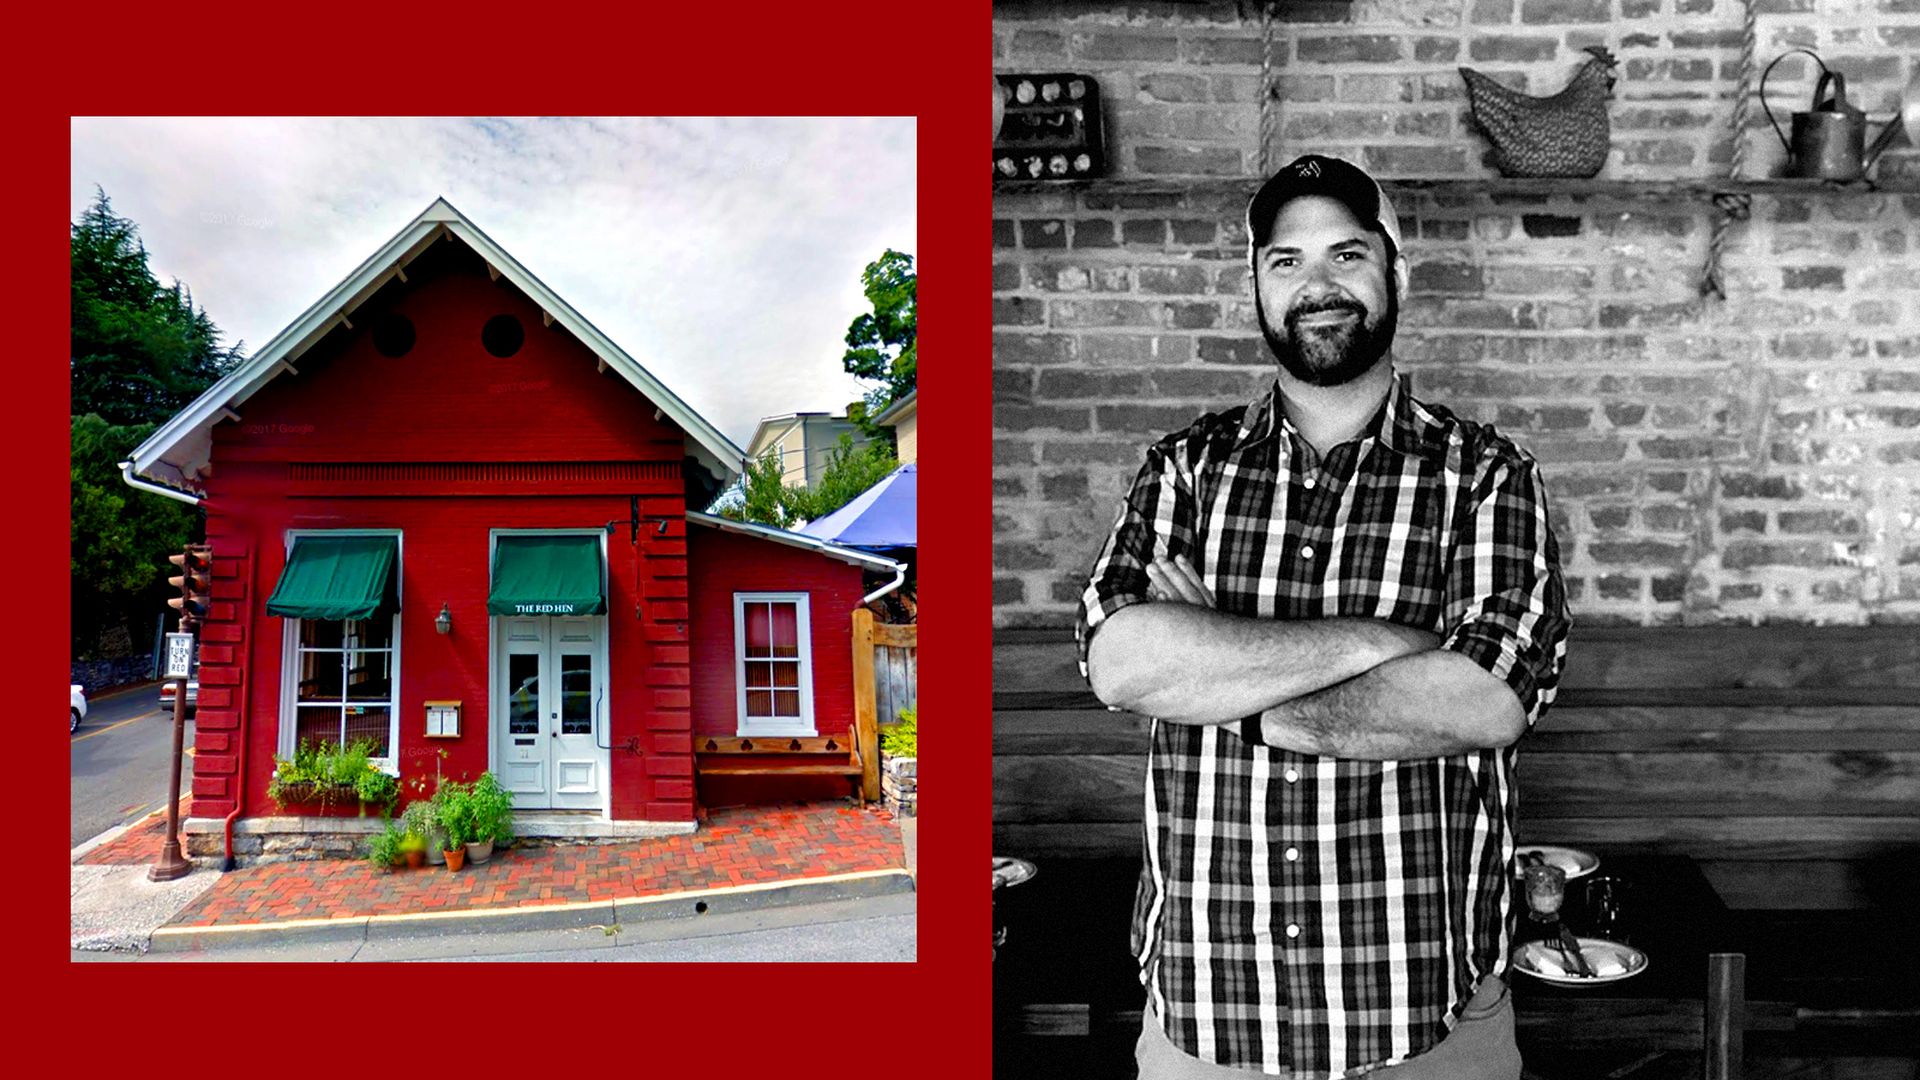 The chef of Red Hen DC pictured opposite the Red Hen in Lexington, Virginia